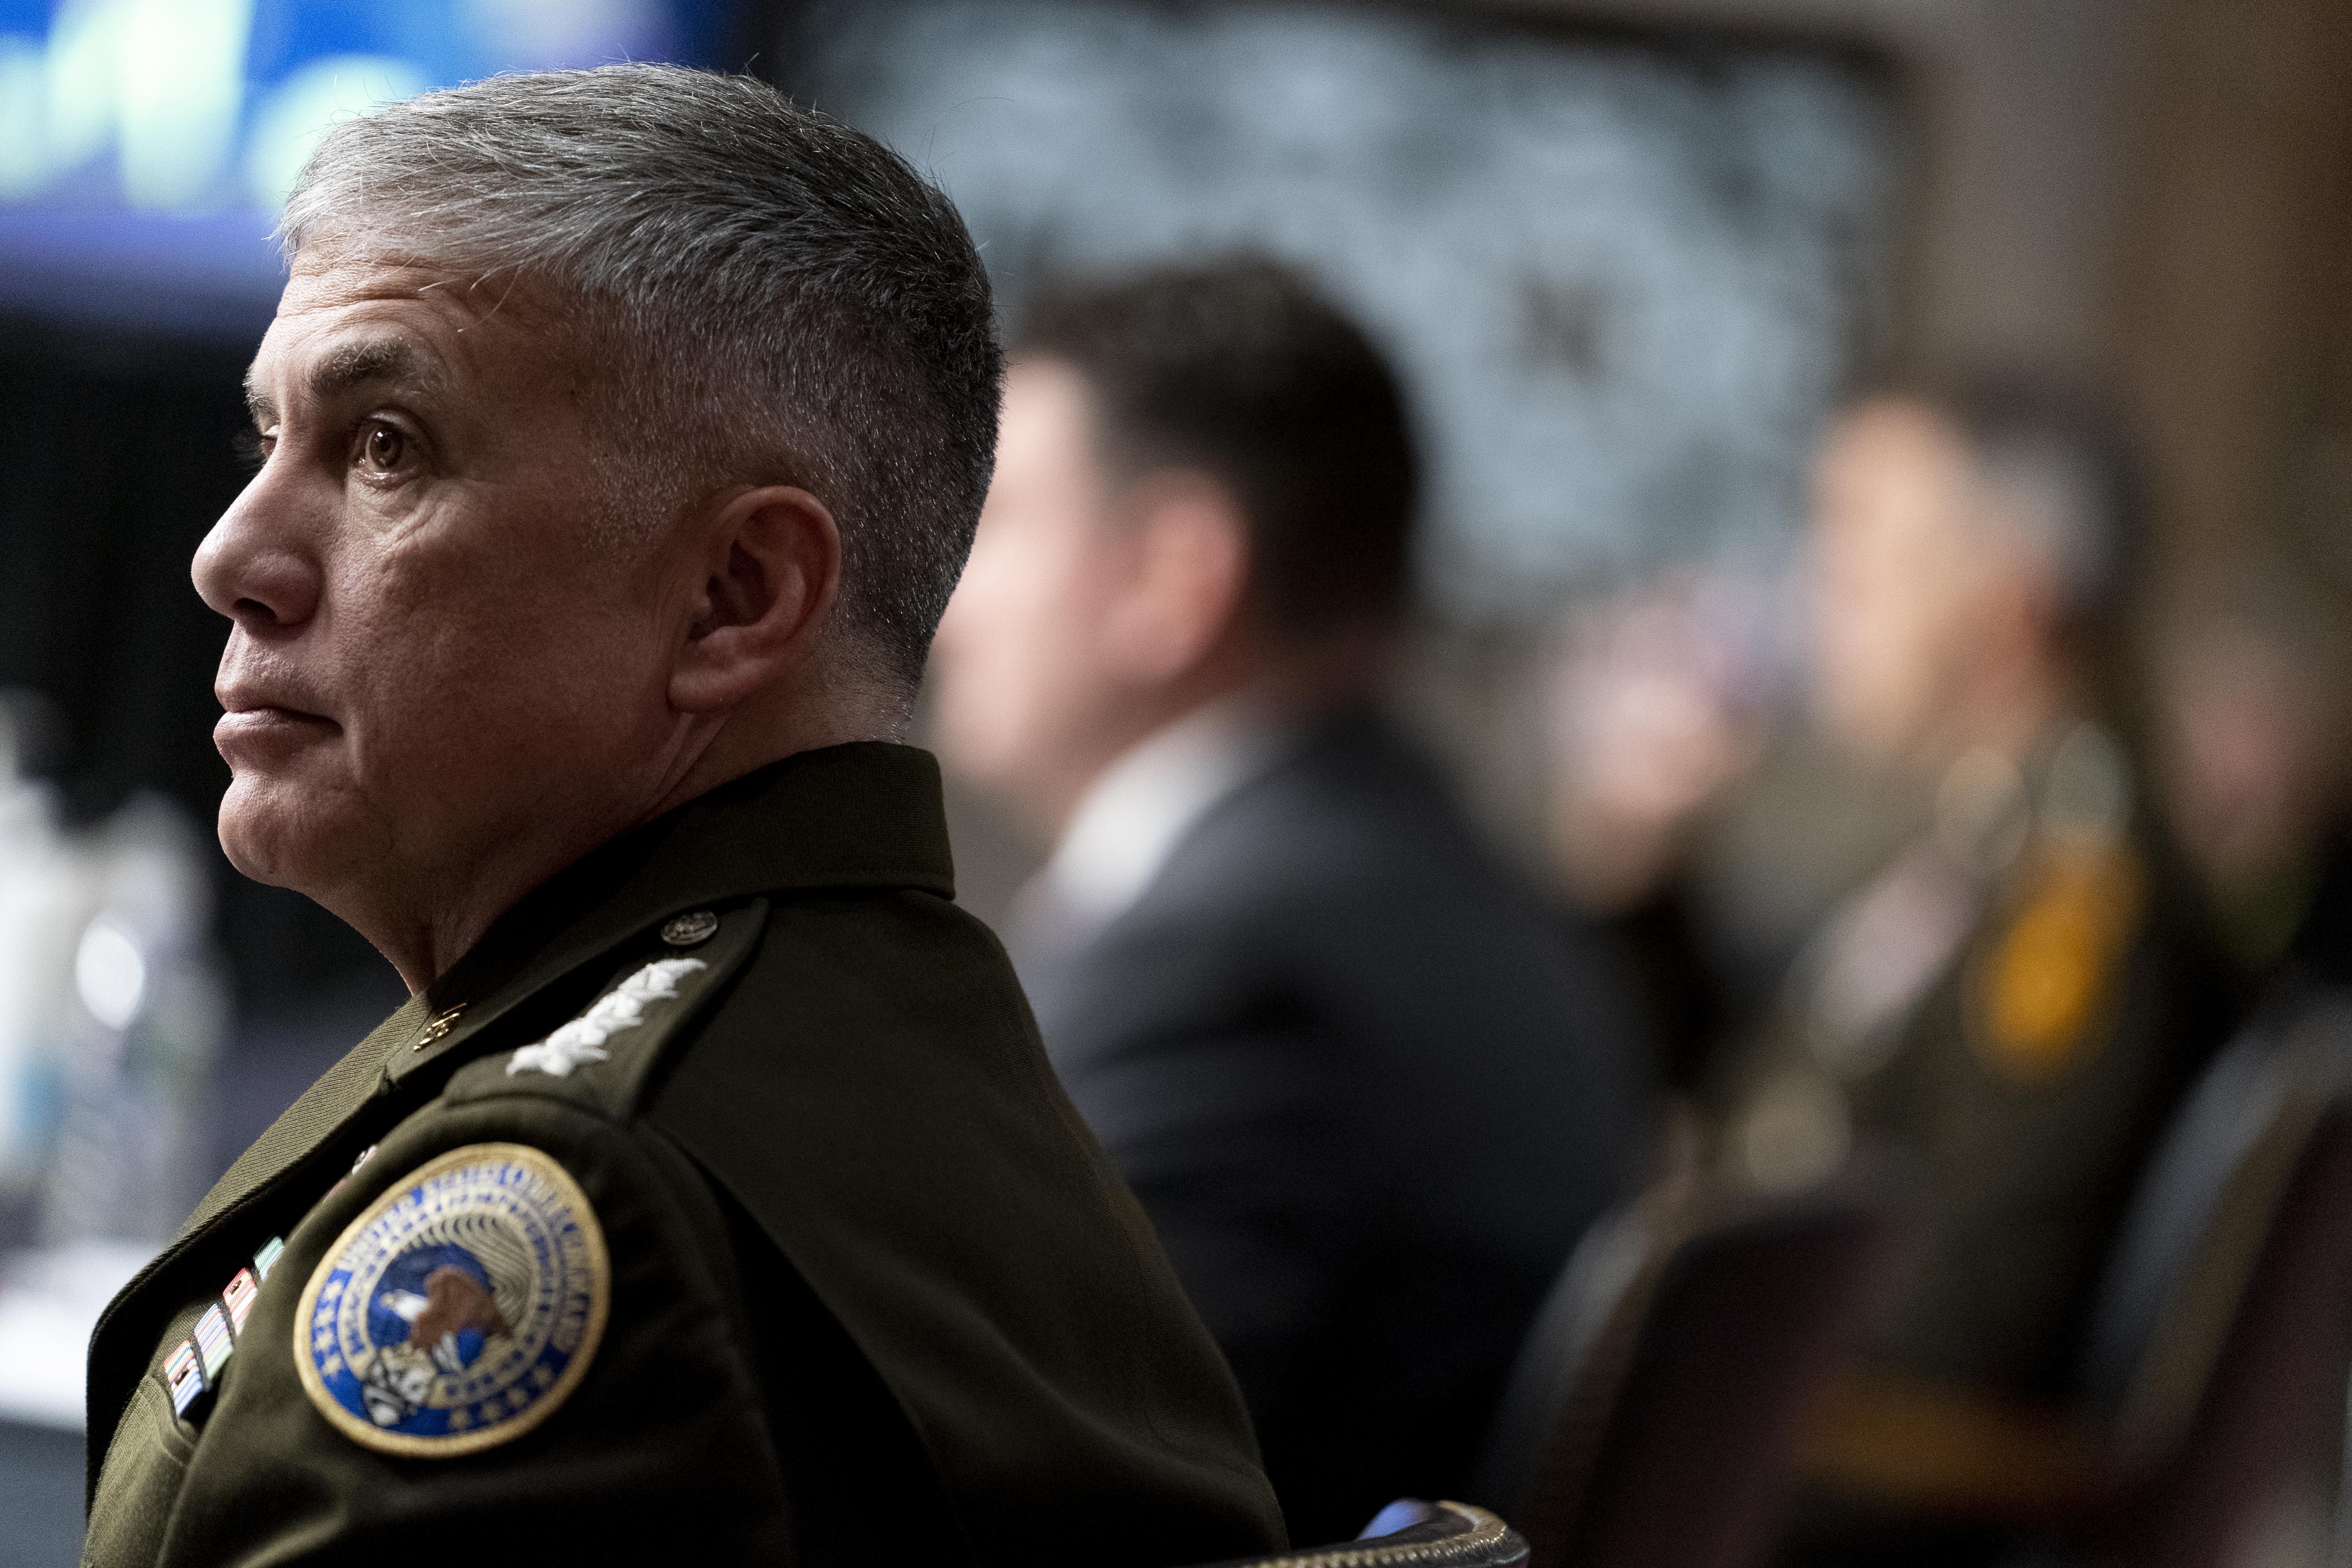 Gen. Paul Nakasone, head of Cyber Command and the National Security Agency, on April 5 during a Senate Armed Services hearing on Capitol Hill in Washington.